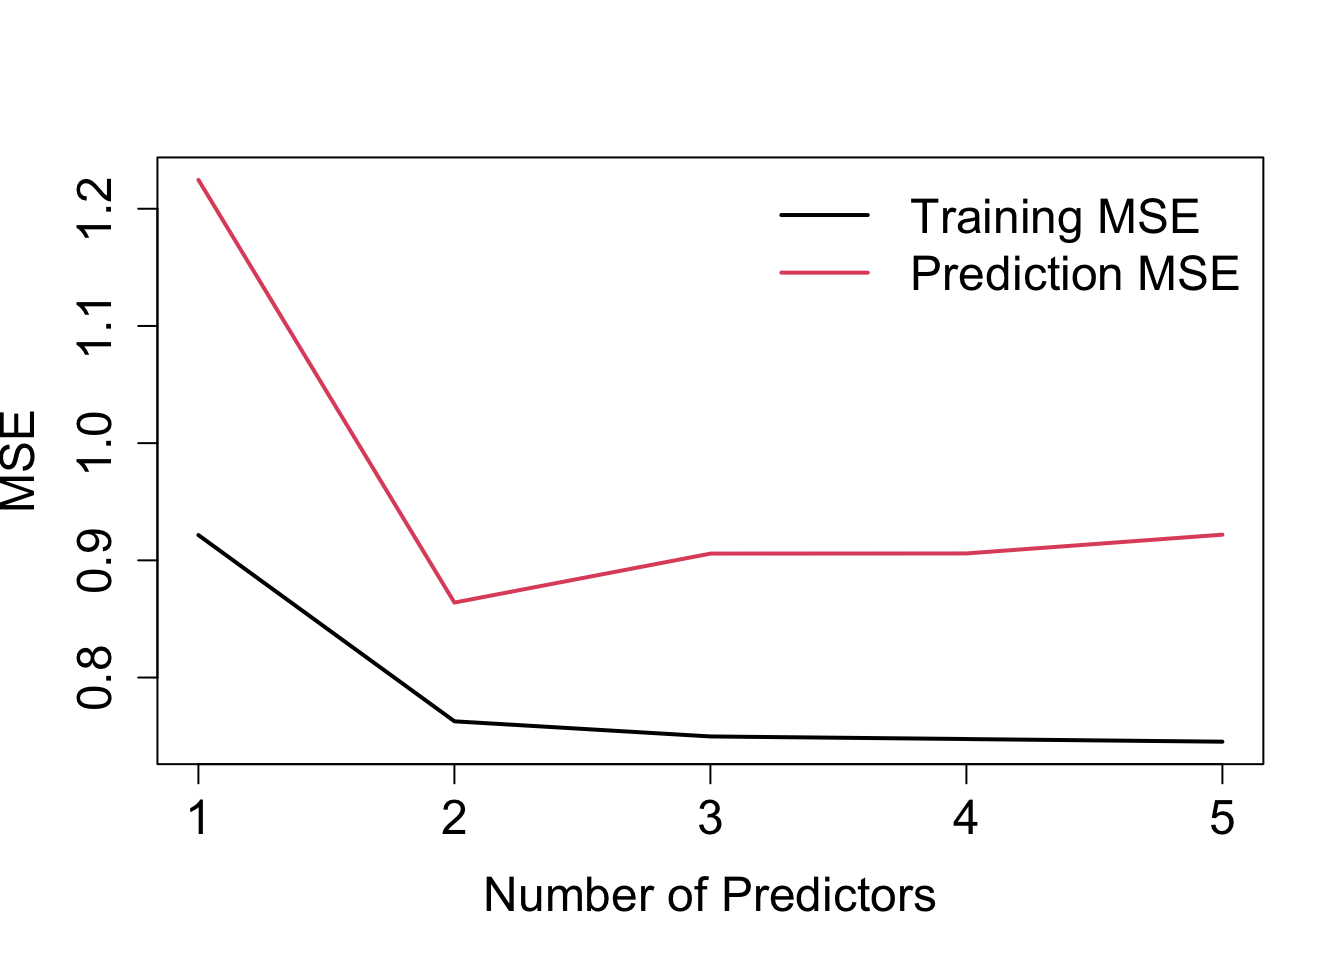 Training MSE and prediction MSE against number of predictors for the example discussed in the text.